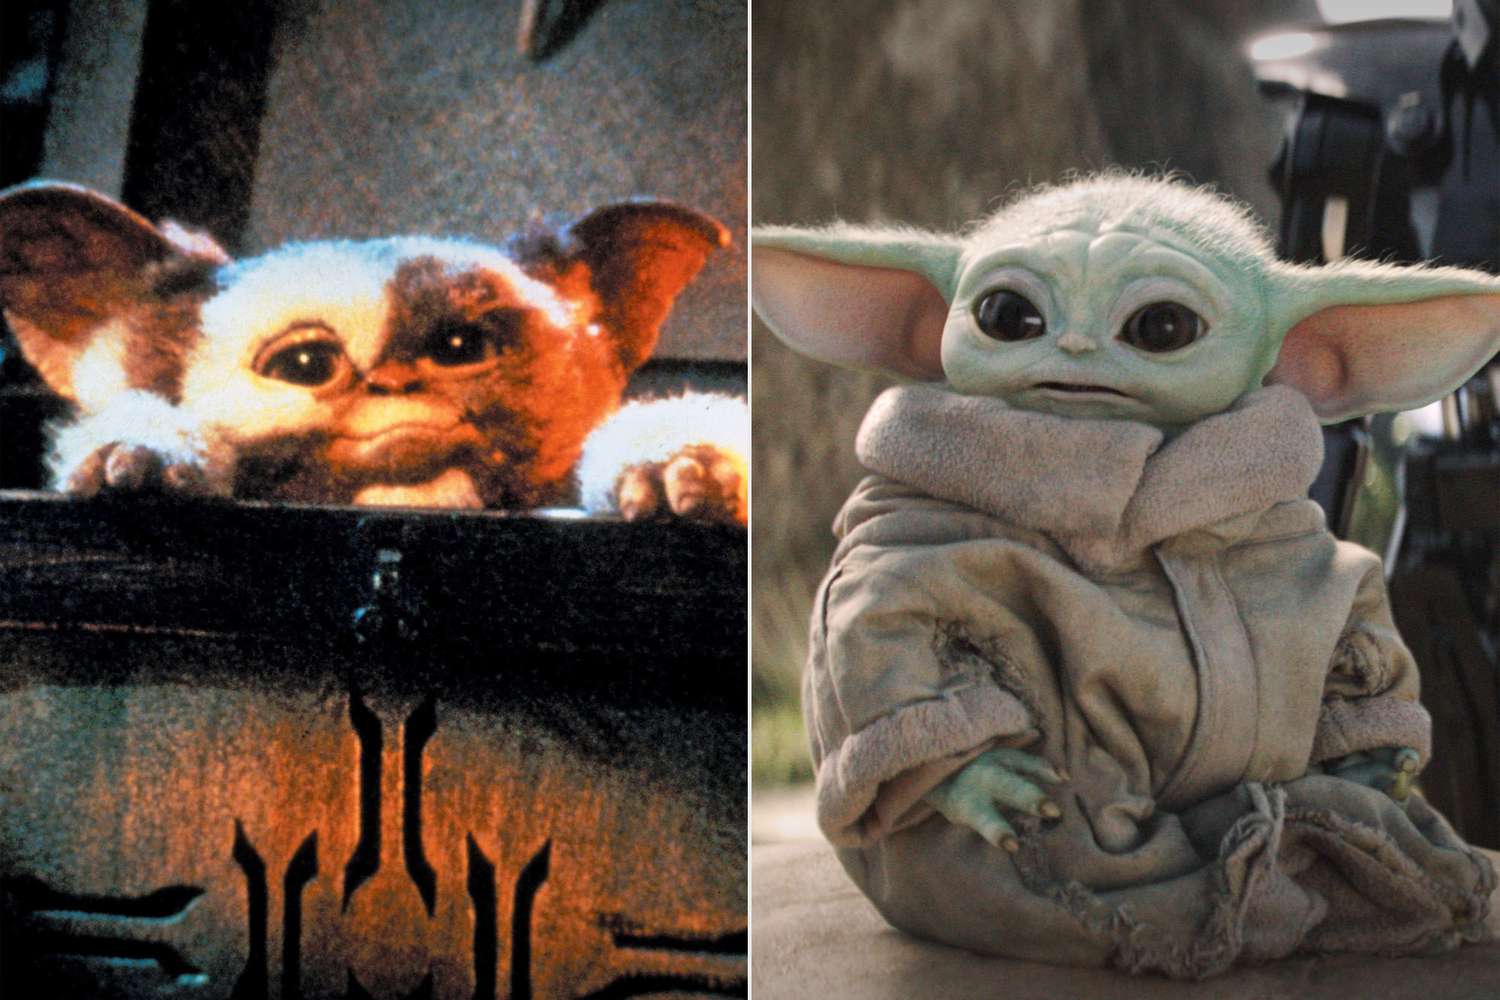 Gizmo in 'Gremlins' and Baby Yoda on 'The Mandalorian'